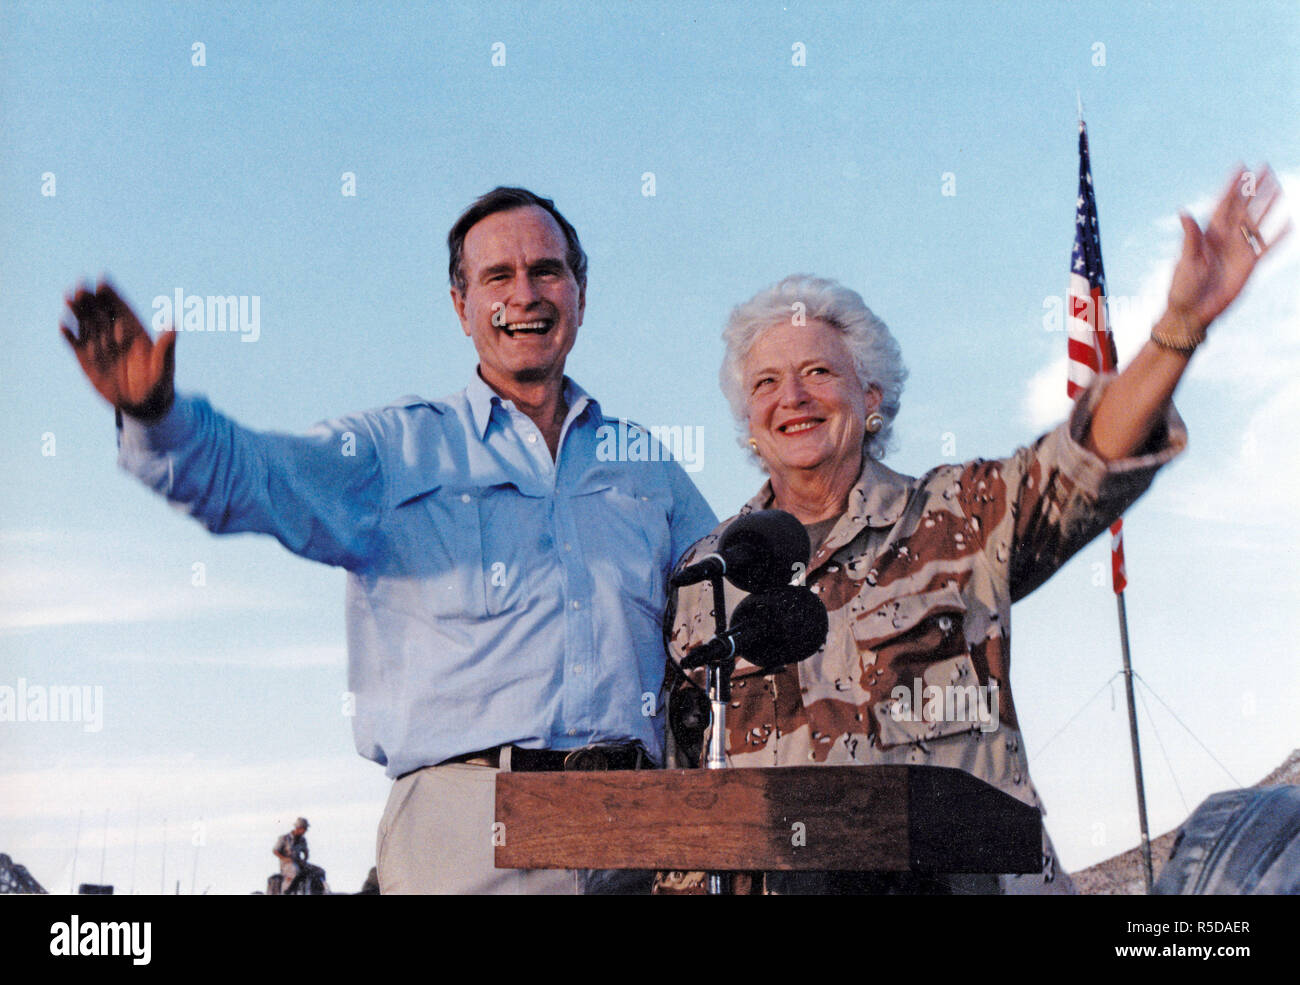 FILE: George H W Bush June 12 1924 – November 30 2018.  George H.W. Bush, a patrician New Englander whose presidency soared with the coalition victory over Iraq in Kuwait, but then plummeted in the throes of a weak economy that led voters to turn him out of office after a single term, has died. He was 94. Pictured: January 22, 1990 - Saudi Arabia - President GEORGE H.W. BUSH and first lady BARBARA BUSH visit US military personnel on Thanksgiving in Saudi Arabia on November 22, 1990. Credit: Ed Bailey/DOD/CNP/ZUMA Wire/Alamy Live News Credit: ZUMA Press, Inc./Alamy Live News Stock Photo